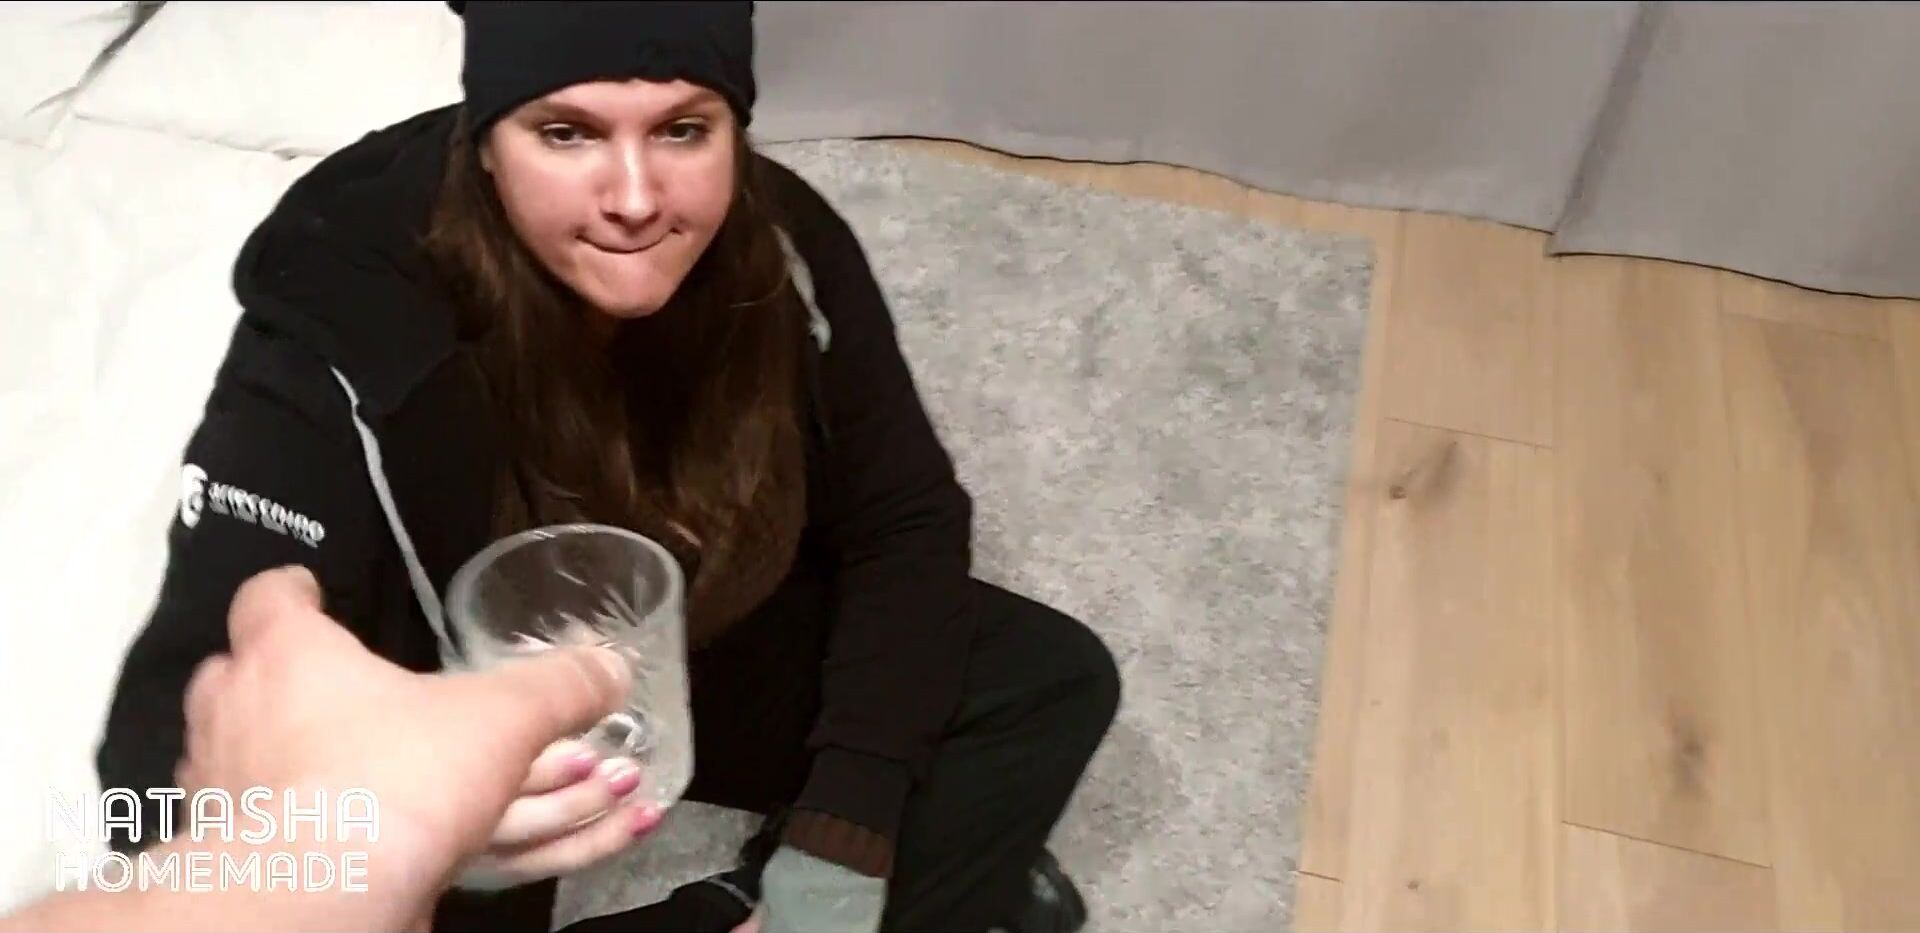 HOMELESS WOMAN GAVE ME BLOWJOB AND SEX for drink and smoke and i filmed it!! Doggy style, no condom, dirty by NATASHA HOMEMADE watch online image